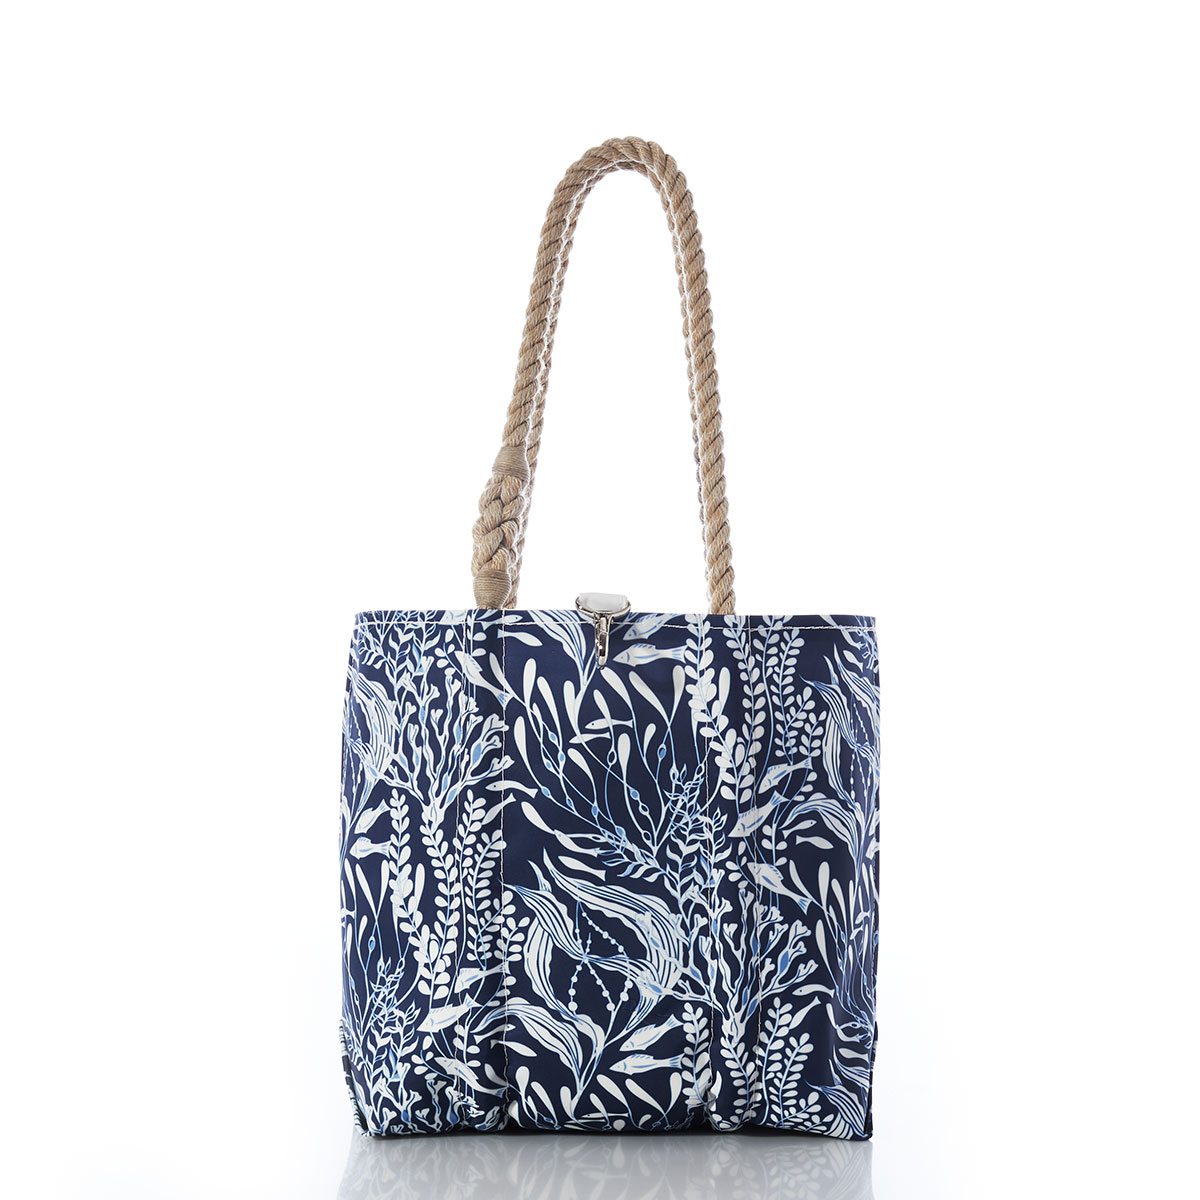 little fish swim among various types of seaweed in shades of navy and white on a recycled sail cloth handbag with hemp rope handles